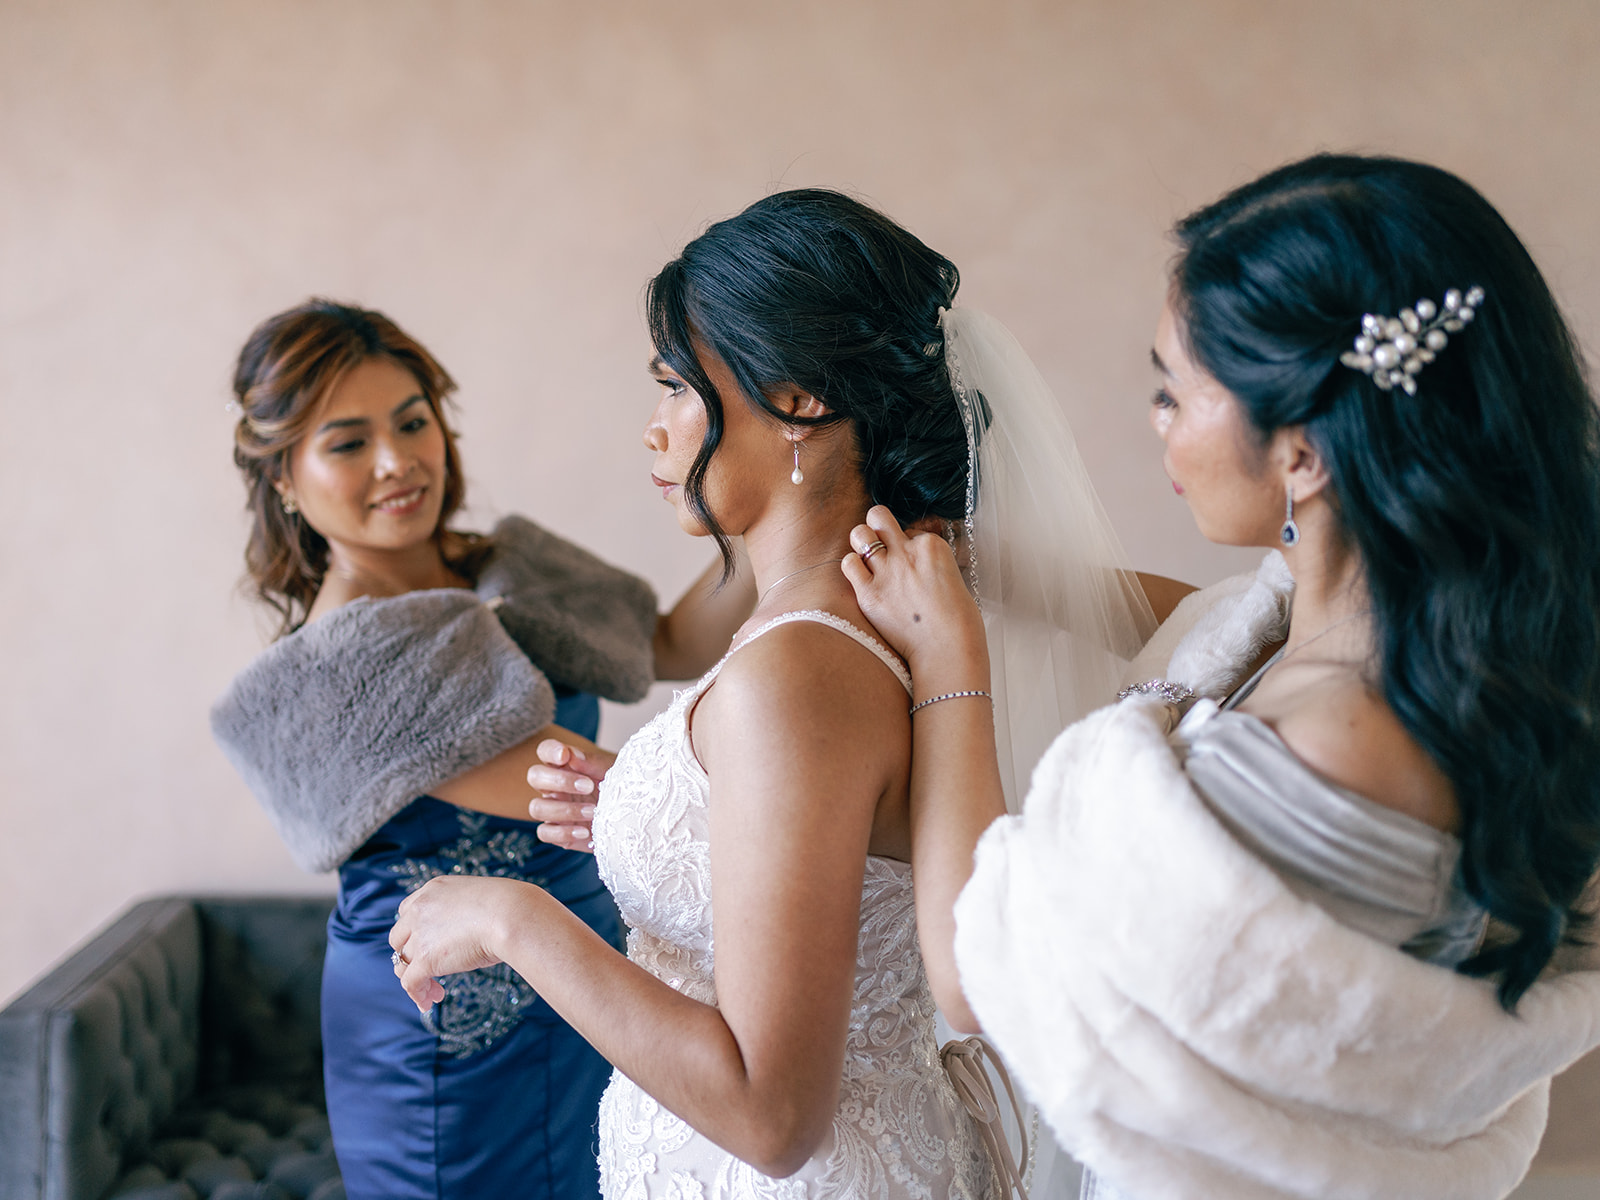 A bride stands in the getting ready room while her bridesmaids help her get ready at her The magnolia wedding